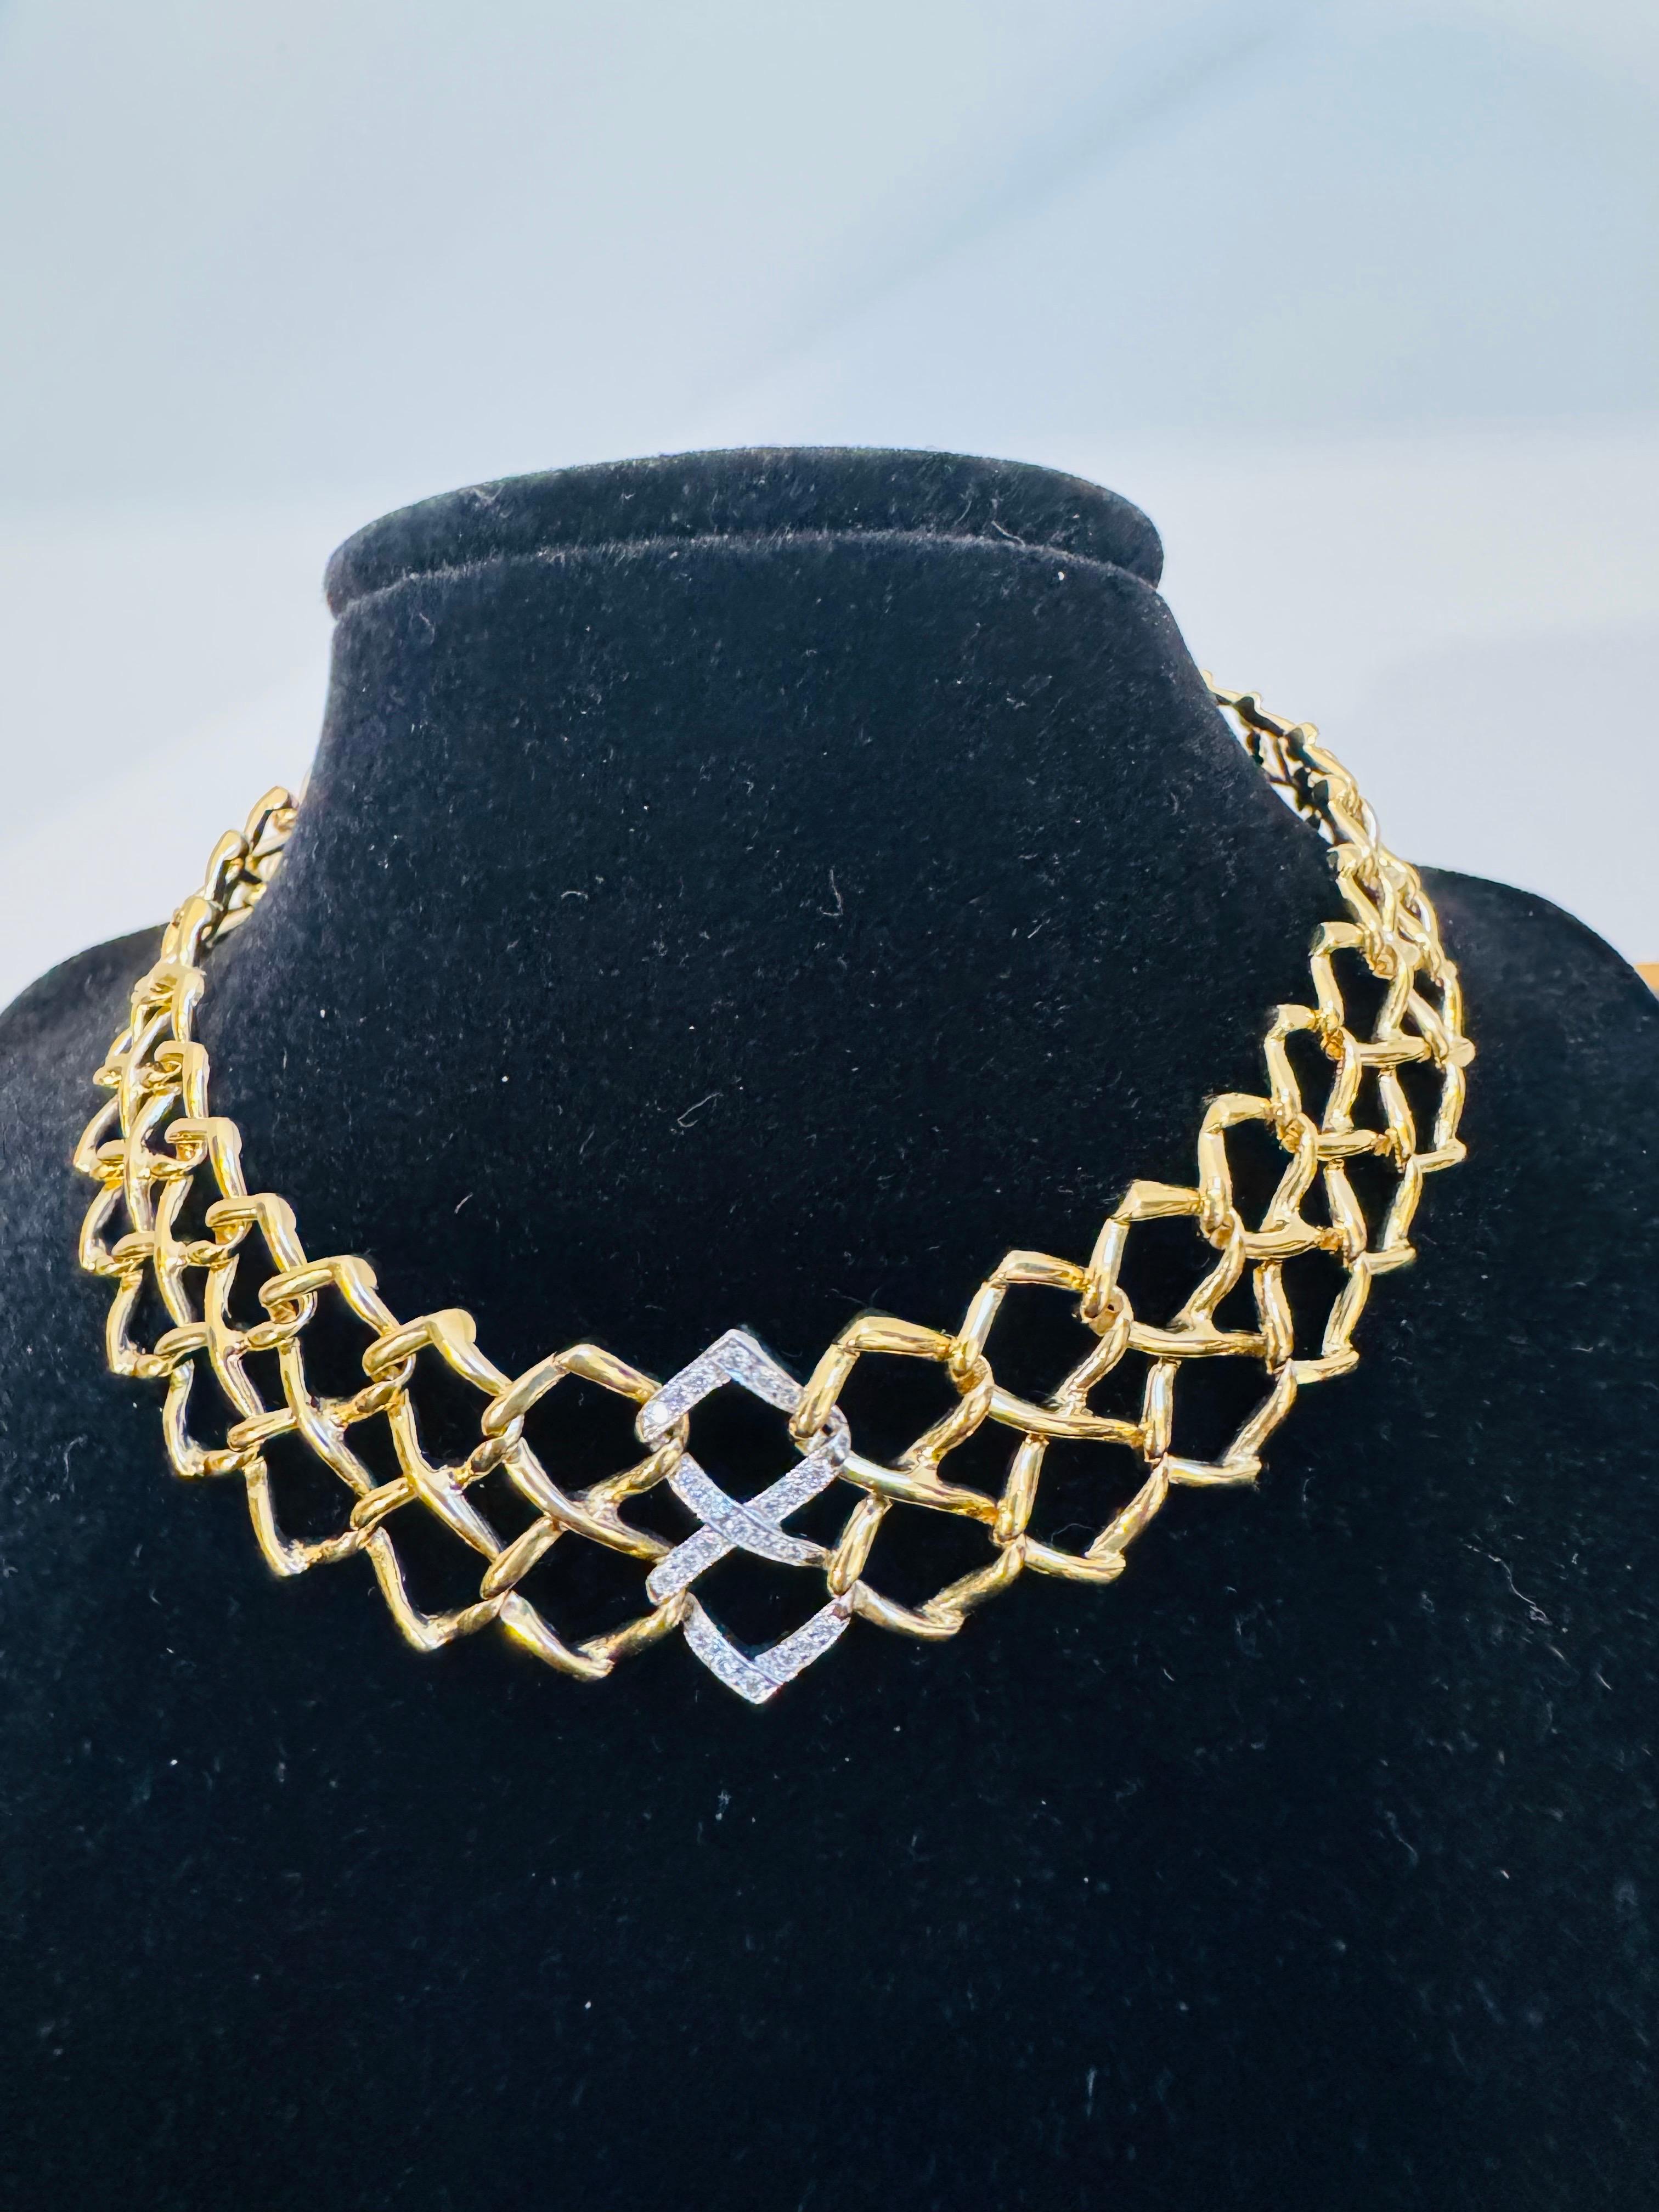 Tiffany & Co. Paloma Picasso Yellow Gold And Platinum Diamond Choker.
Its a very heavy 18 Karat gold 75.1 gm 
Rare vintage Tiffany & Co necklace designed by Paloma Picasso, crafted in 18 karat yellow gold (circa 1982).

Dating to 1982 the bold open